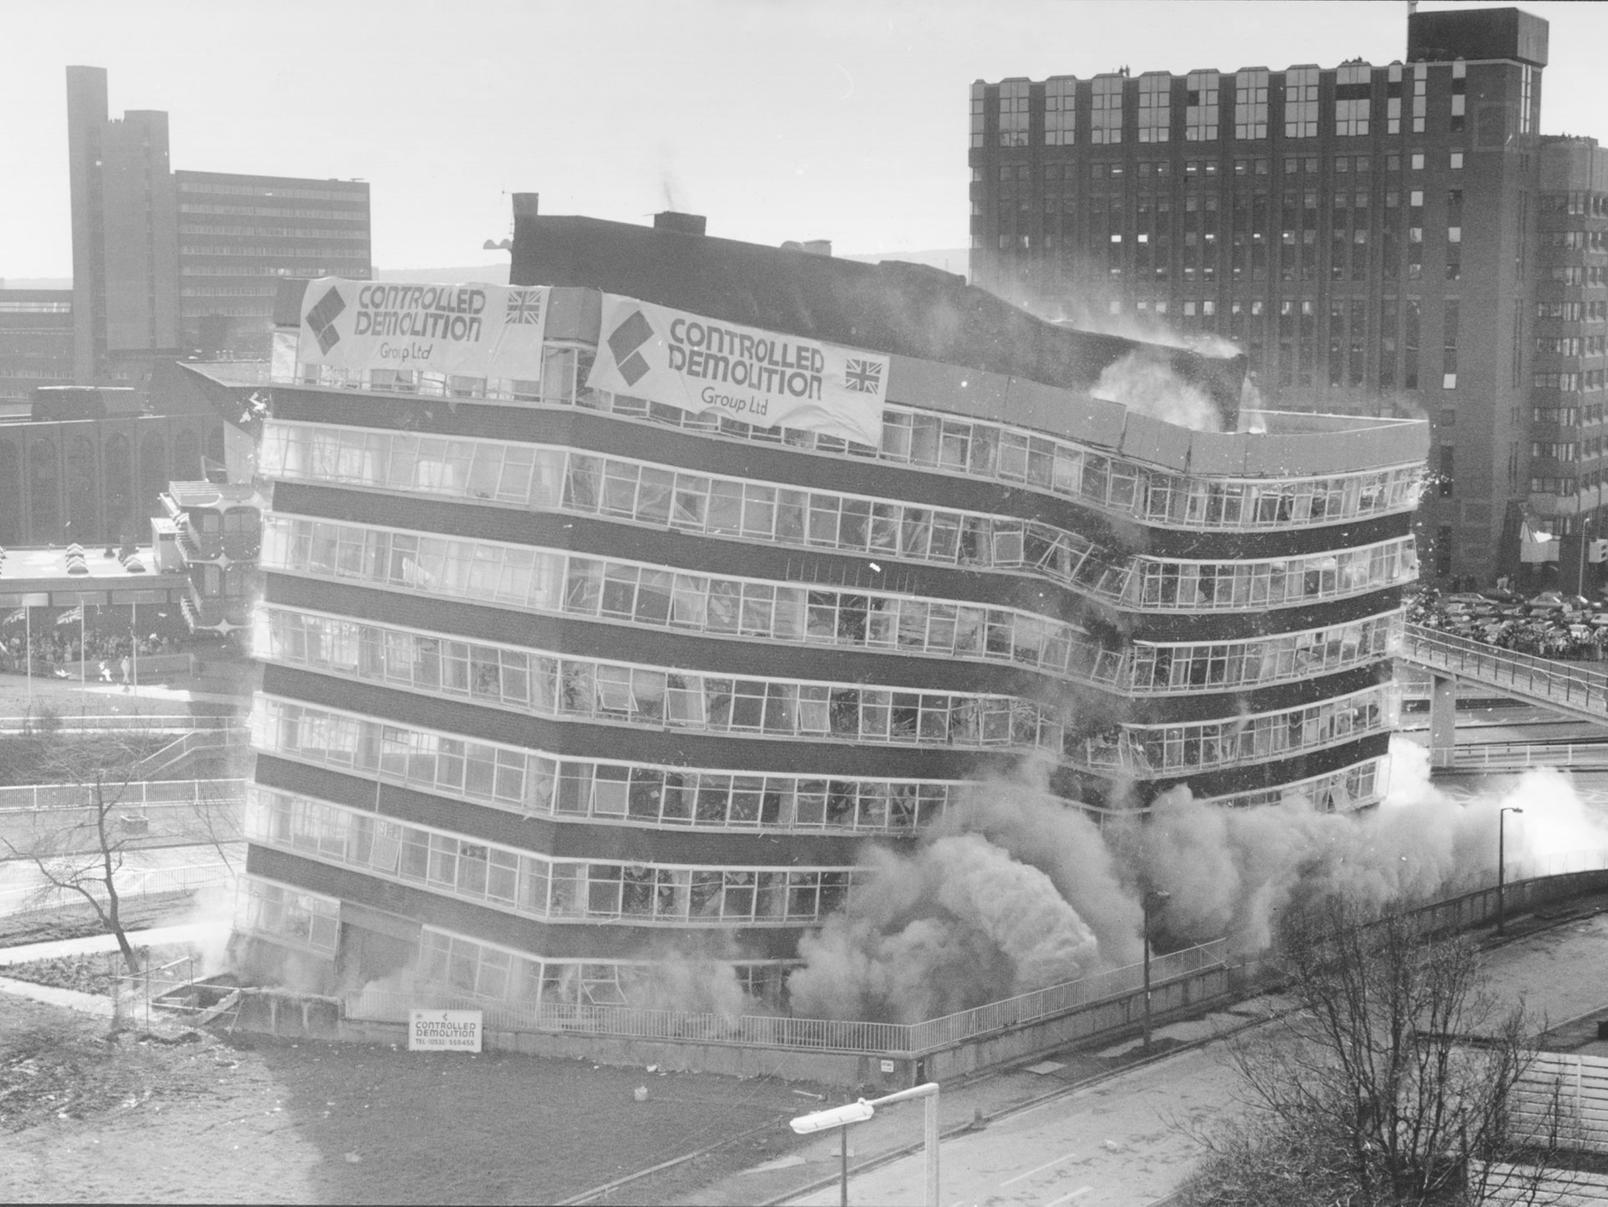 Homes were cleared and major roads closed for Leeds's big bang - the demolition of Telecom House in February 1990.